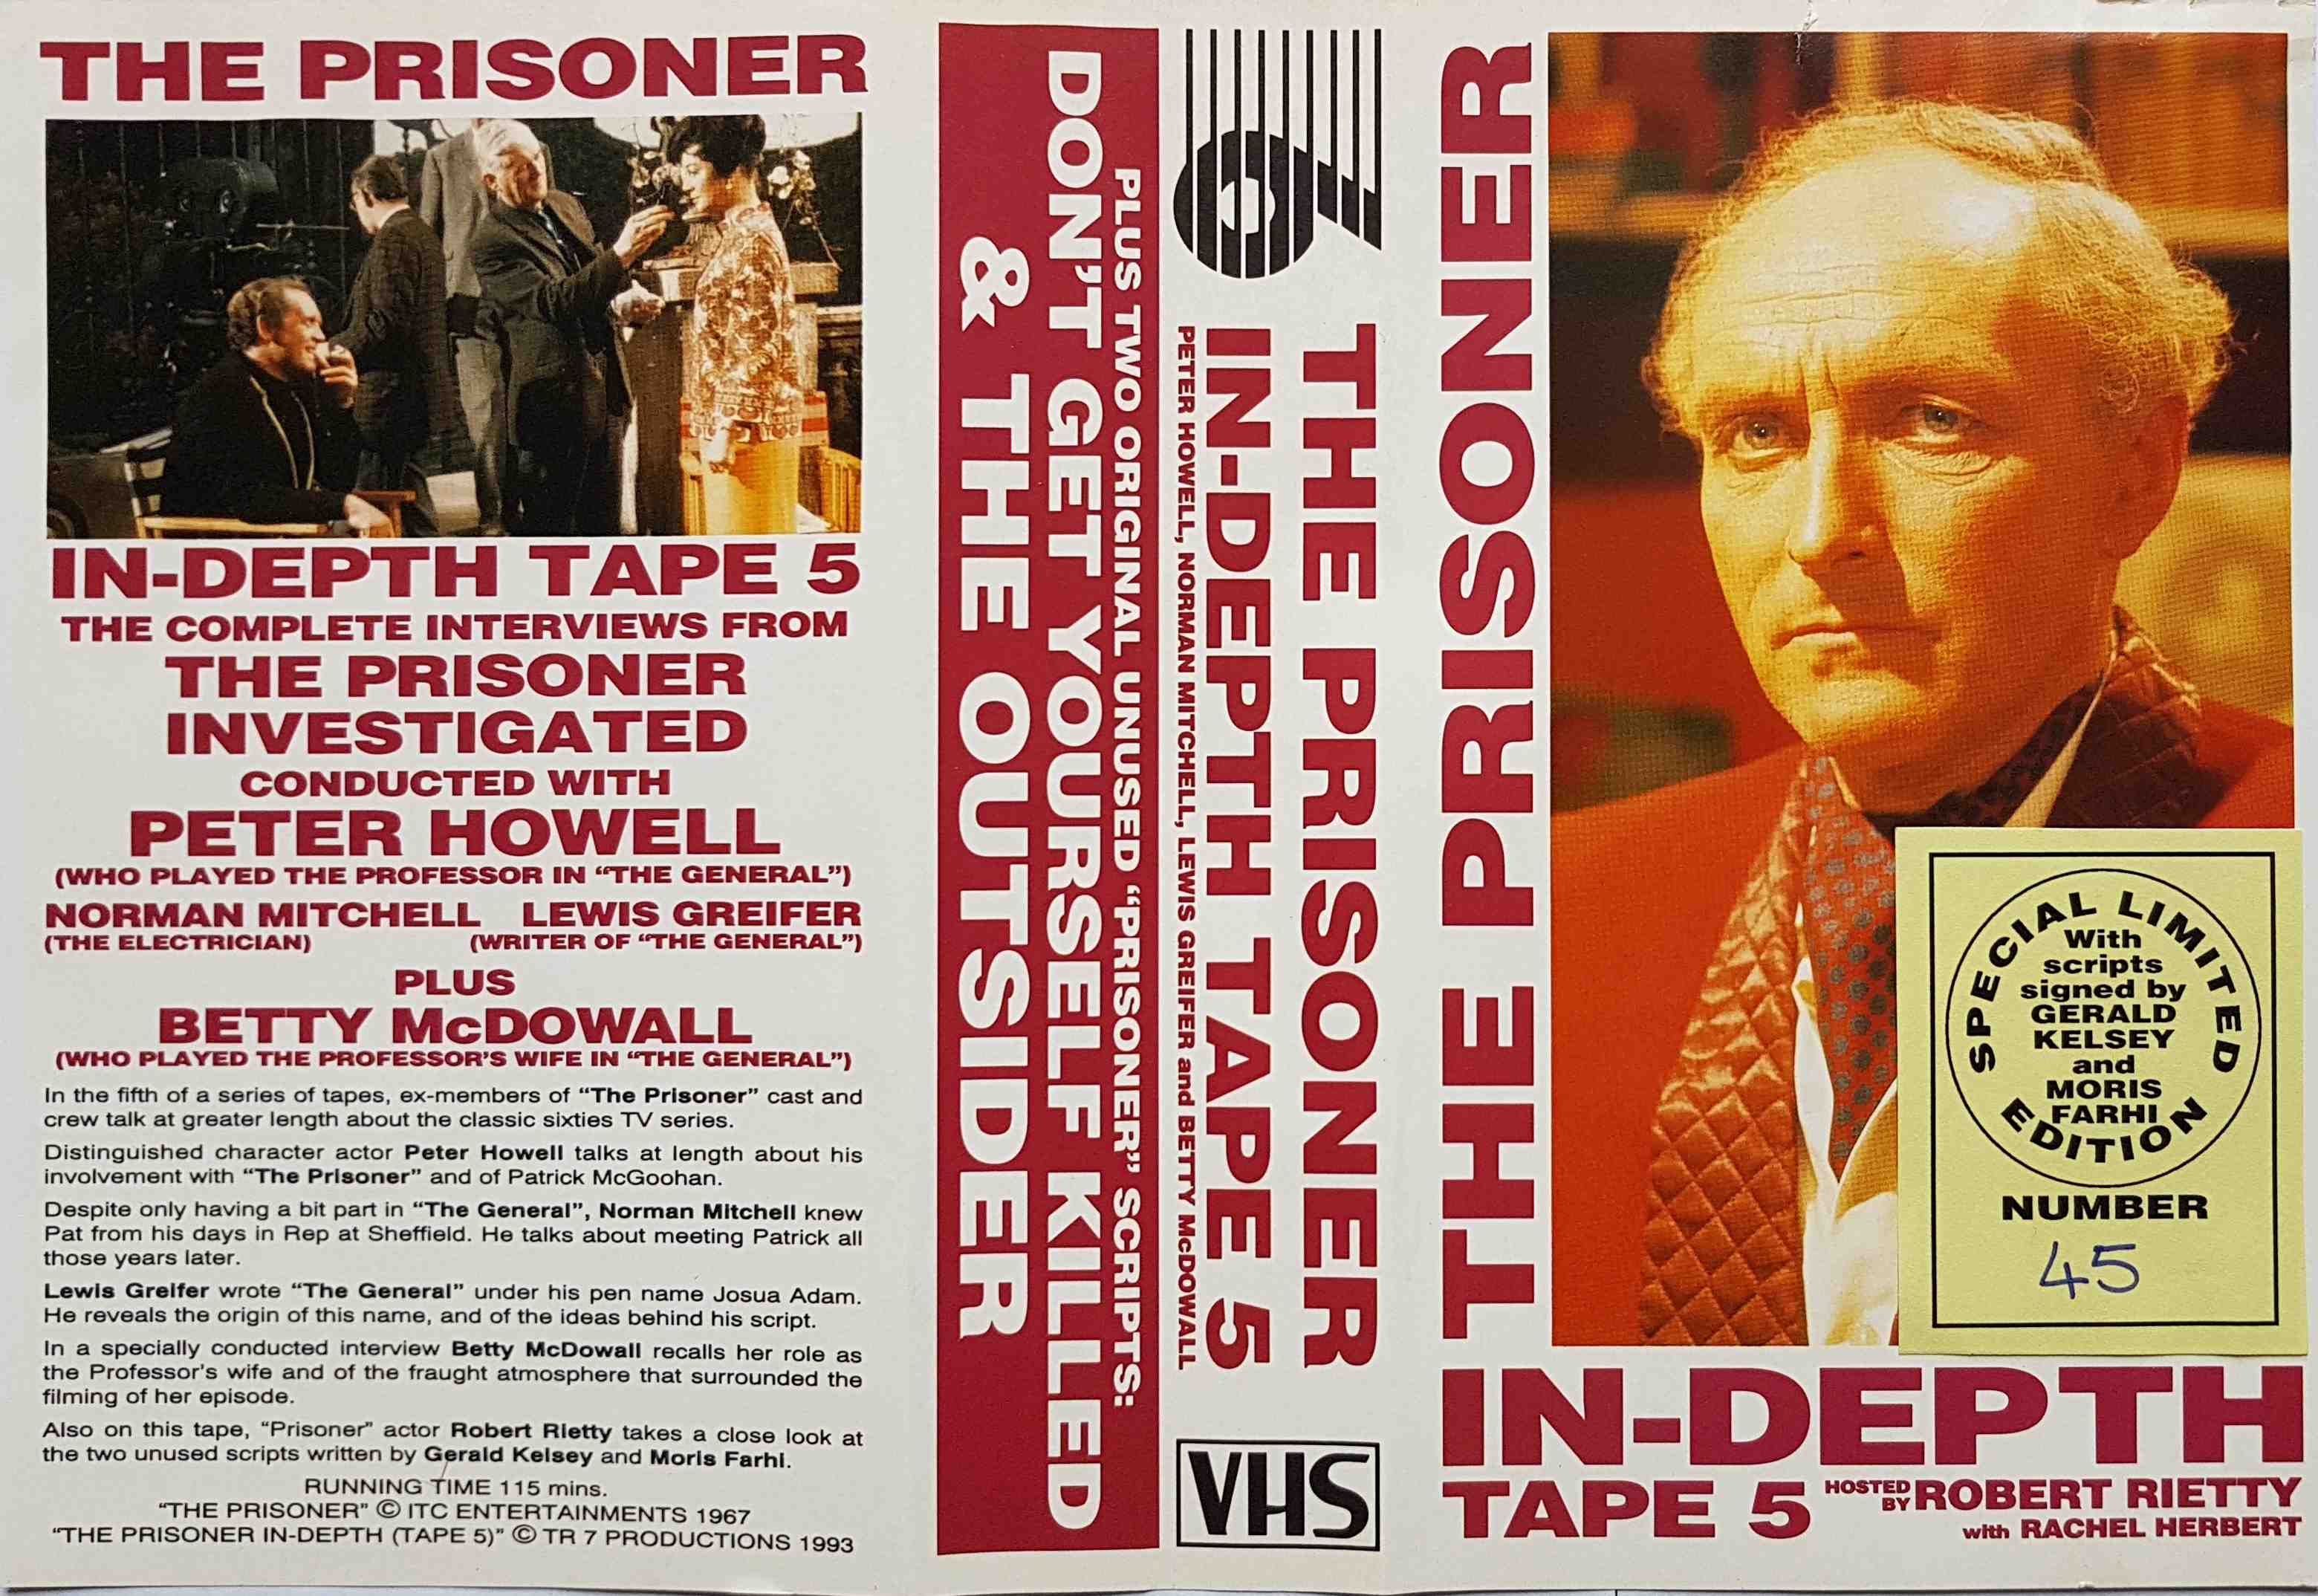 Picture of videos-TPI-5 The prisoner indepth tape 5 by artist Unknown from ITV, Channel 4 and Channel 5 library